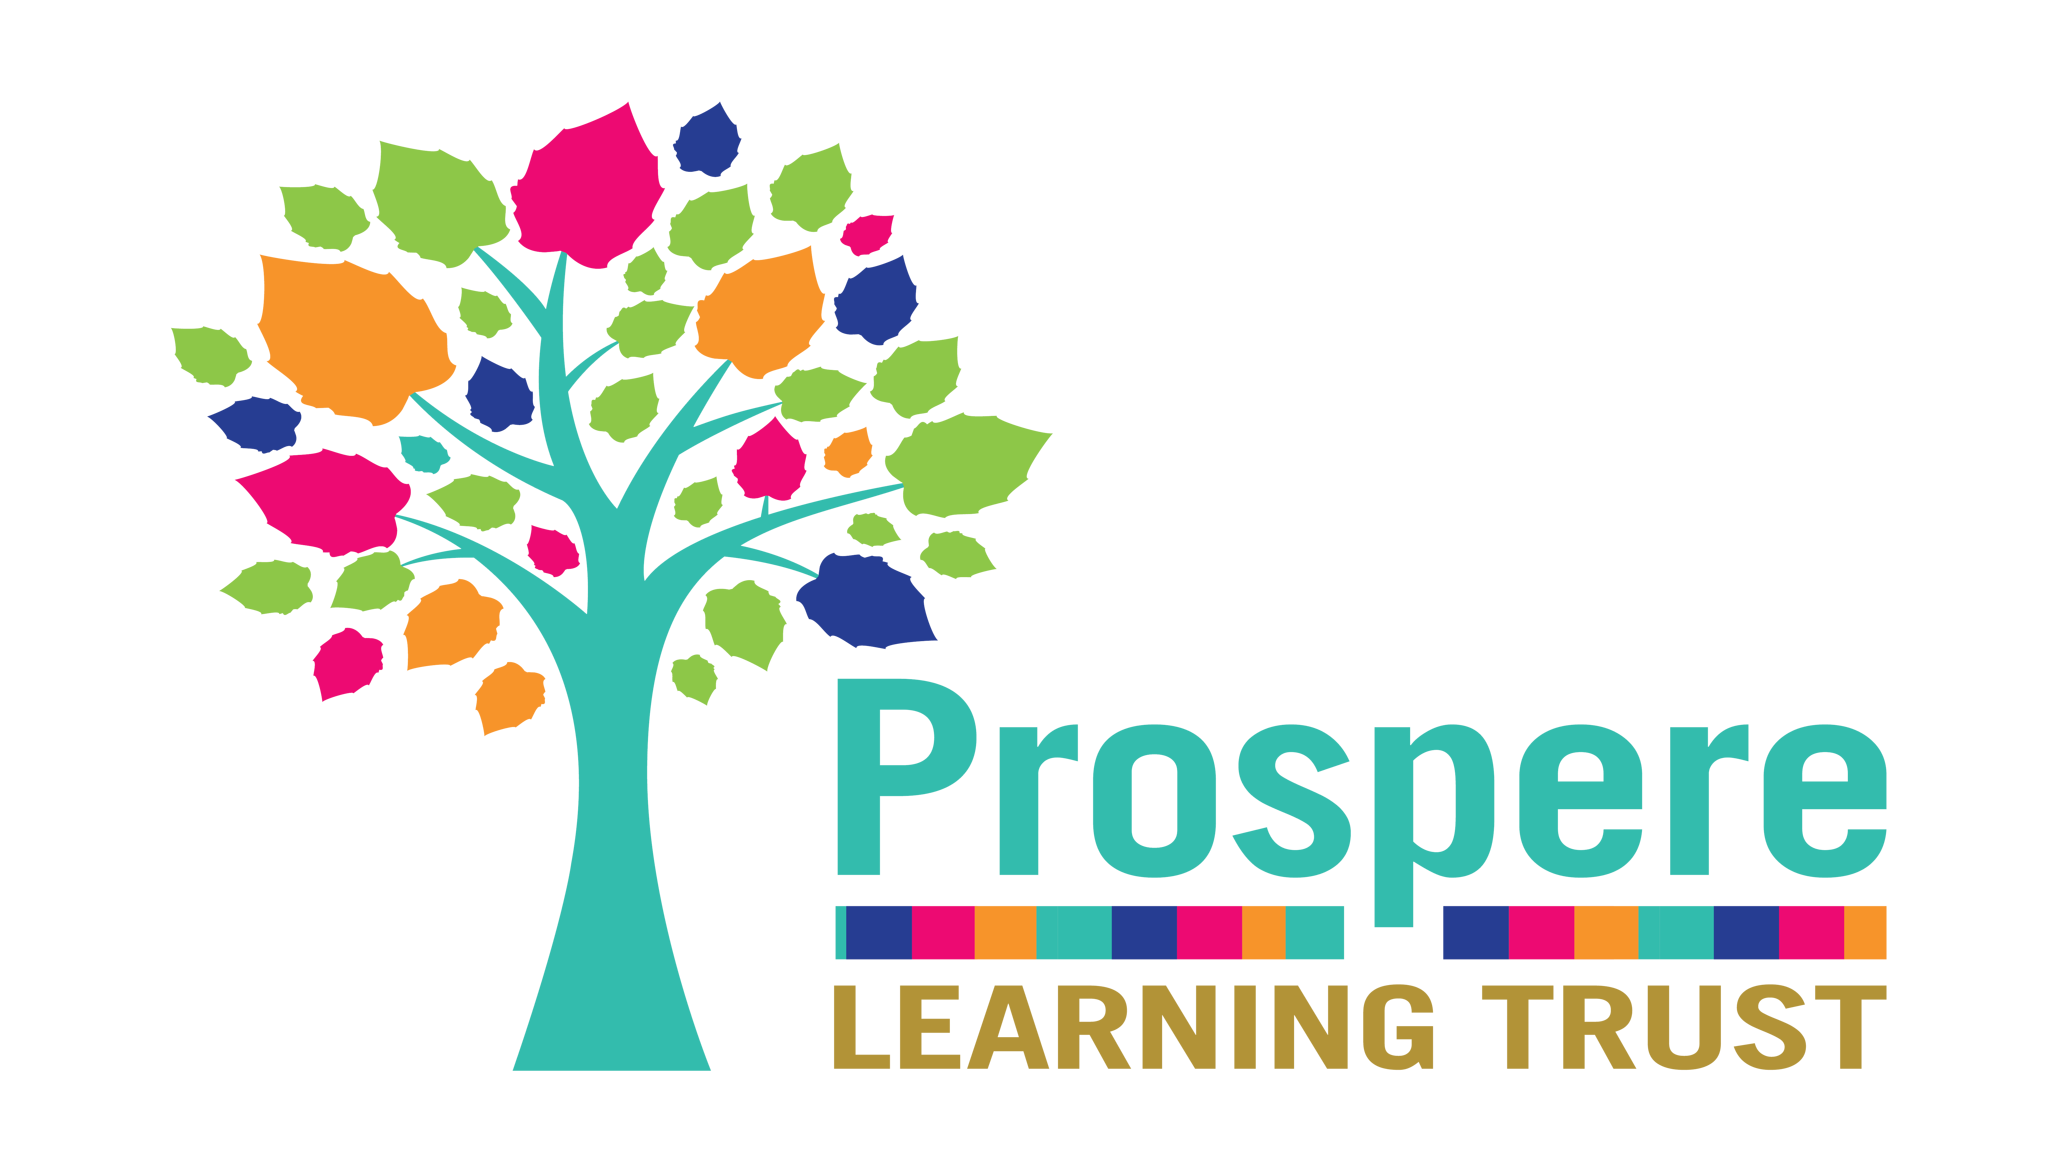 Logo of prospered learning trust featuring a colorful tree with multicolored leaves and the organization's name in bold beside it.